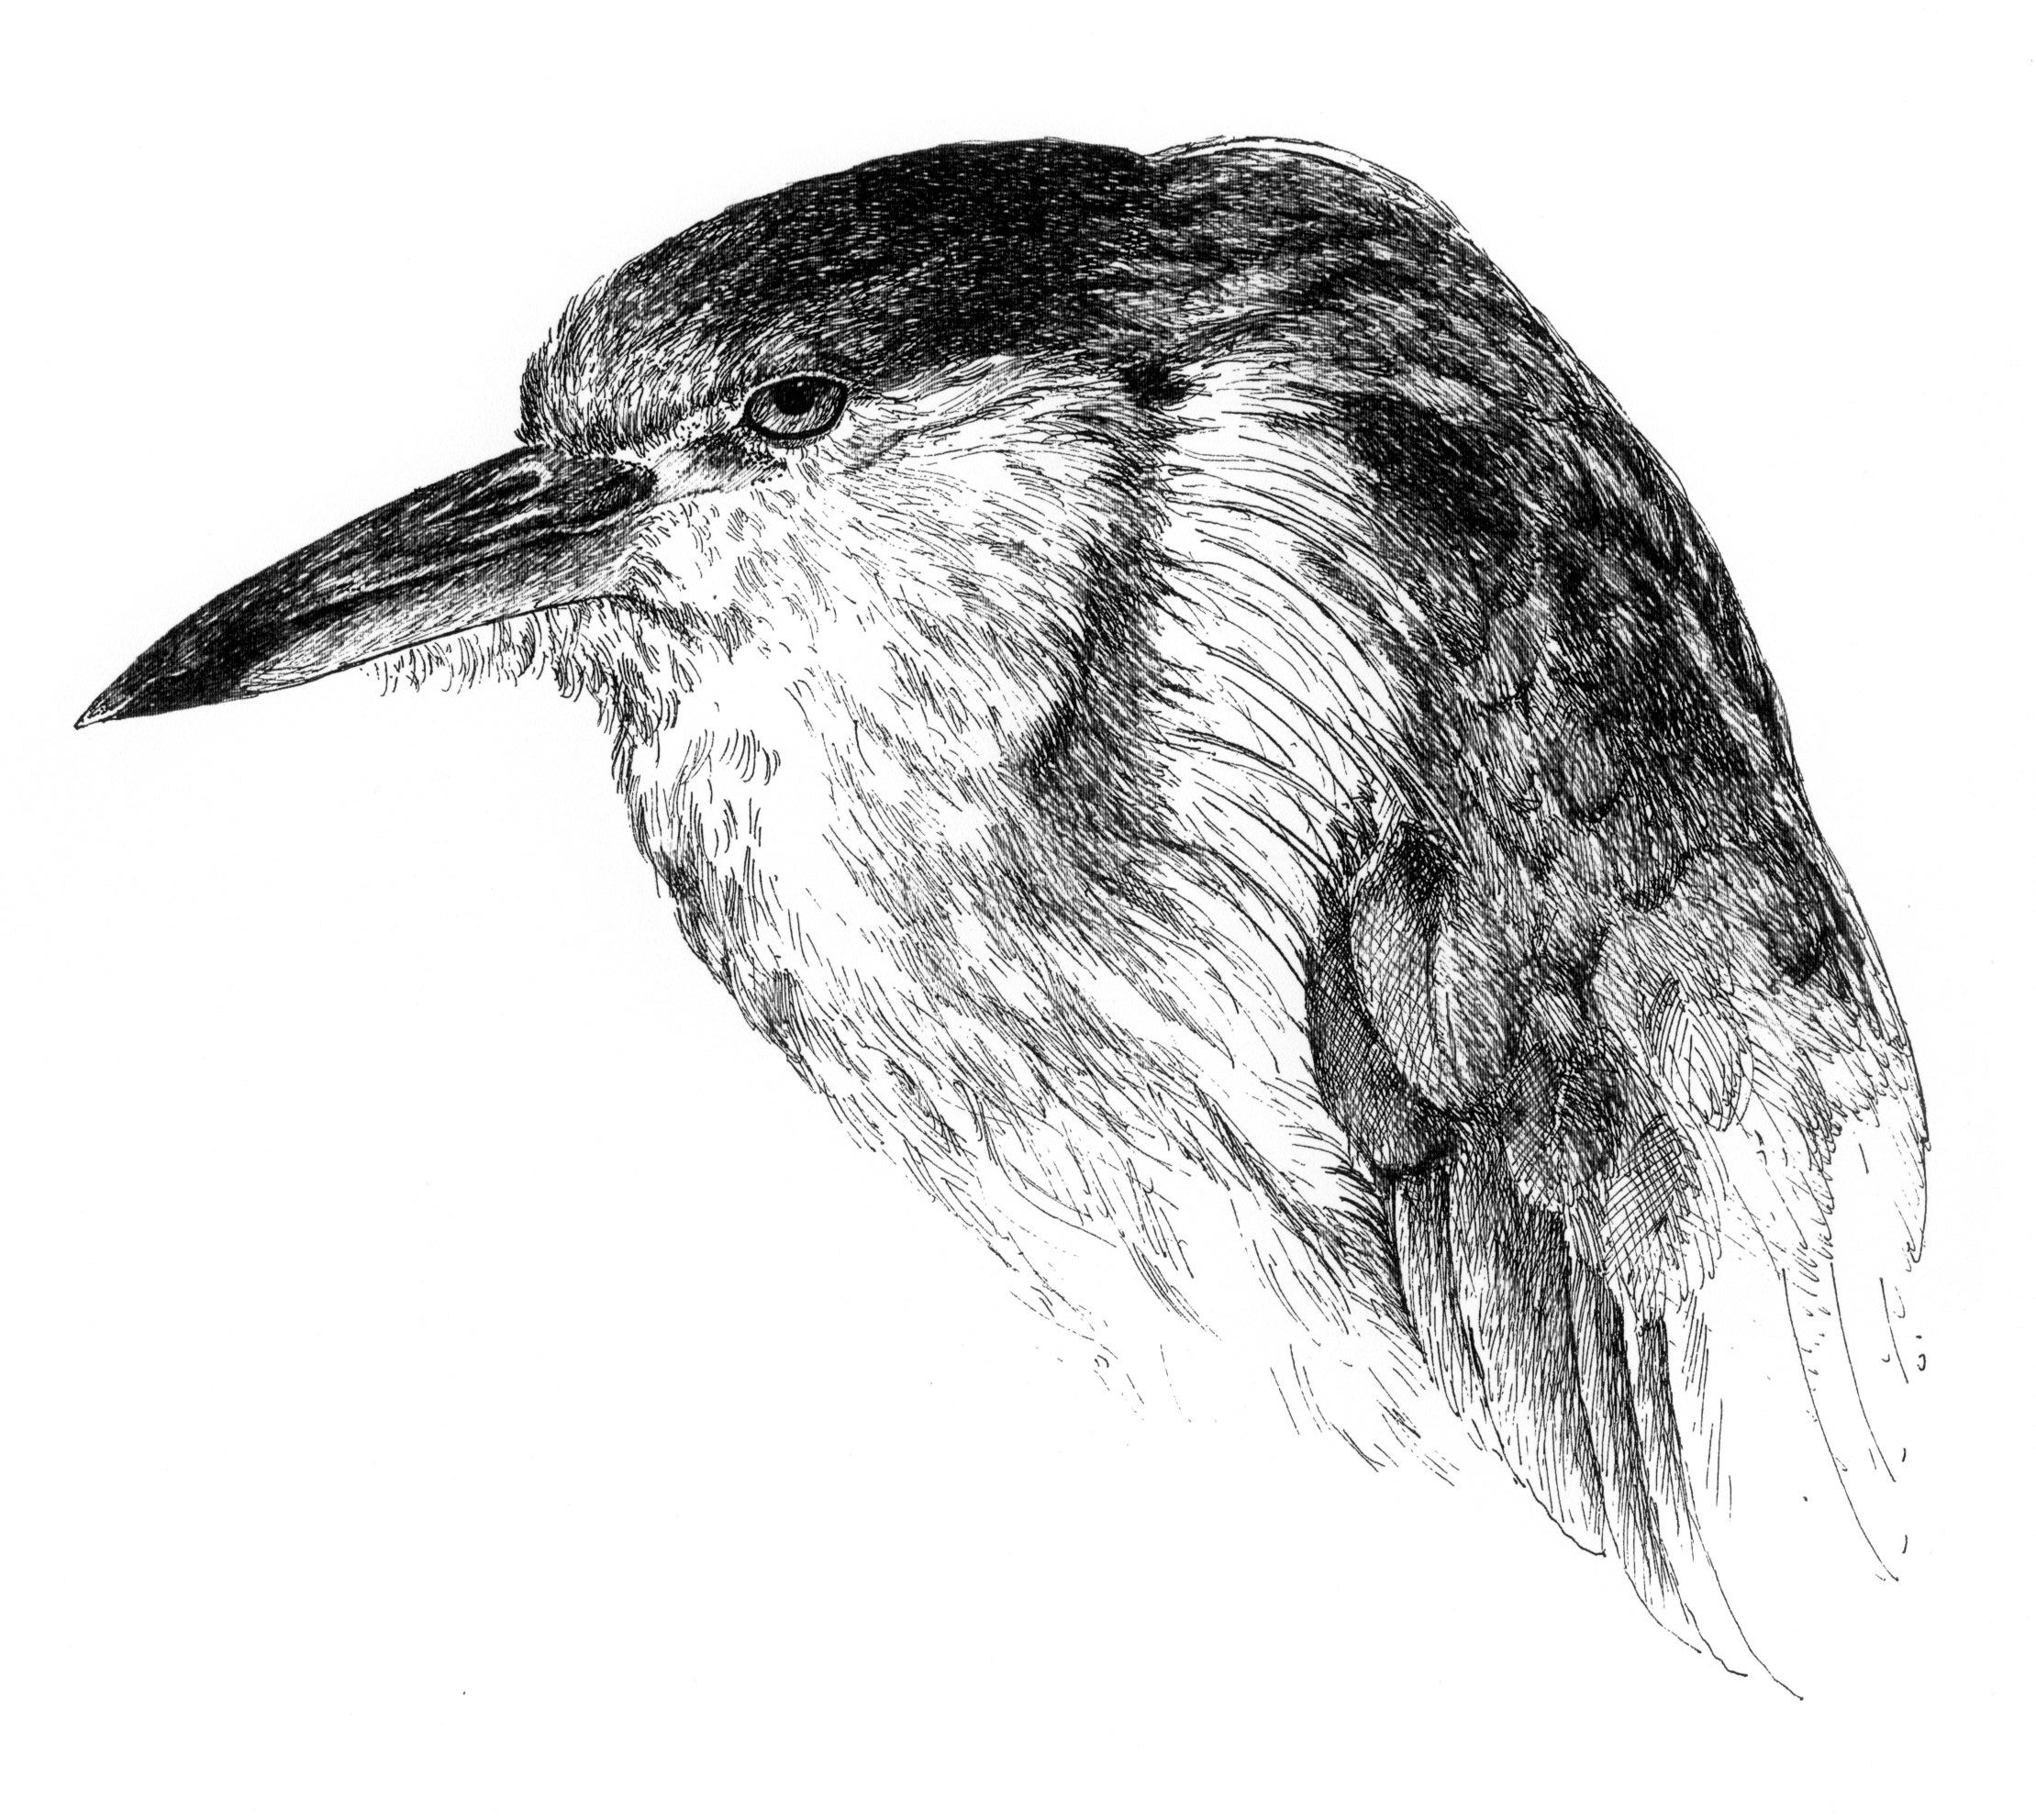 43_pen_and_ink_heron_2003